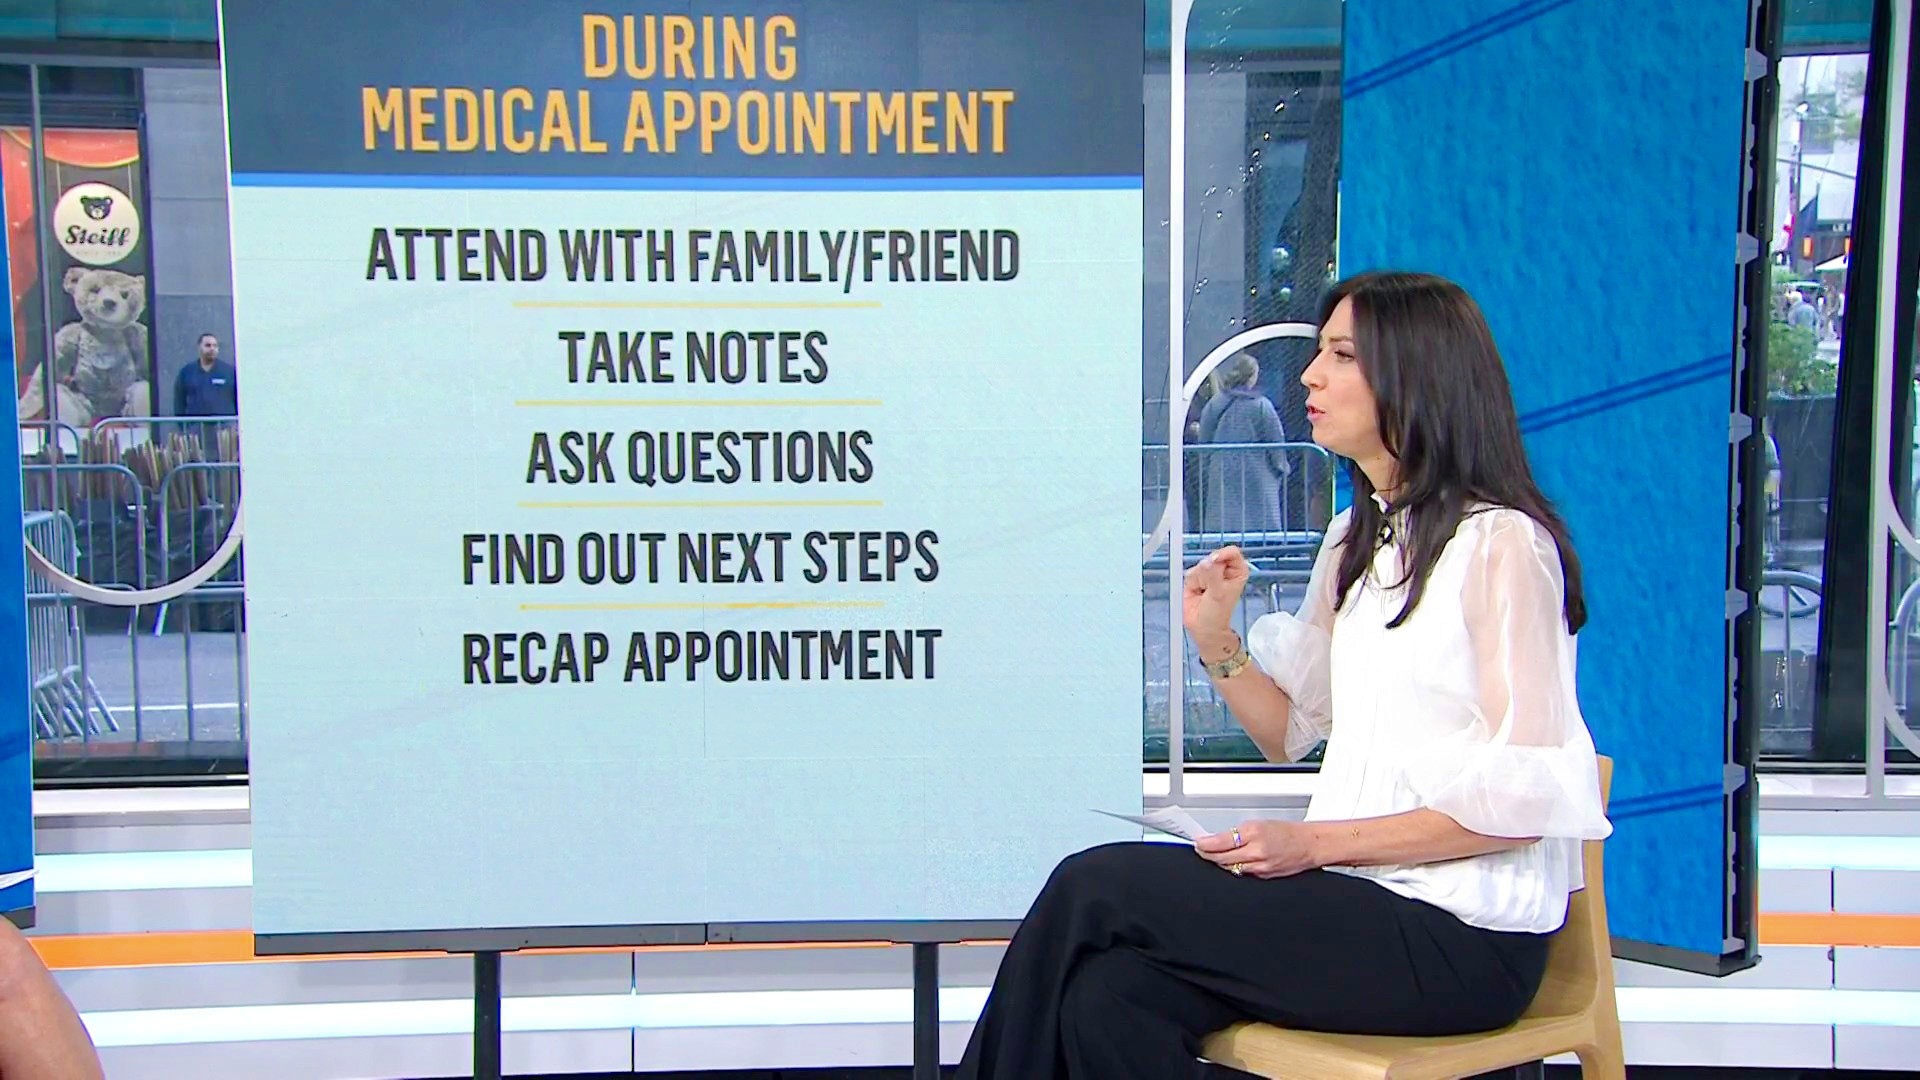 Health checklist: What to do before, during and after a doctor's visit